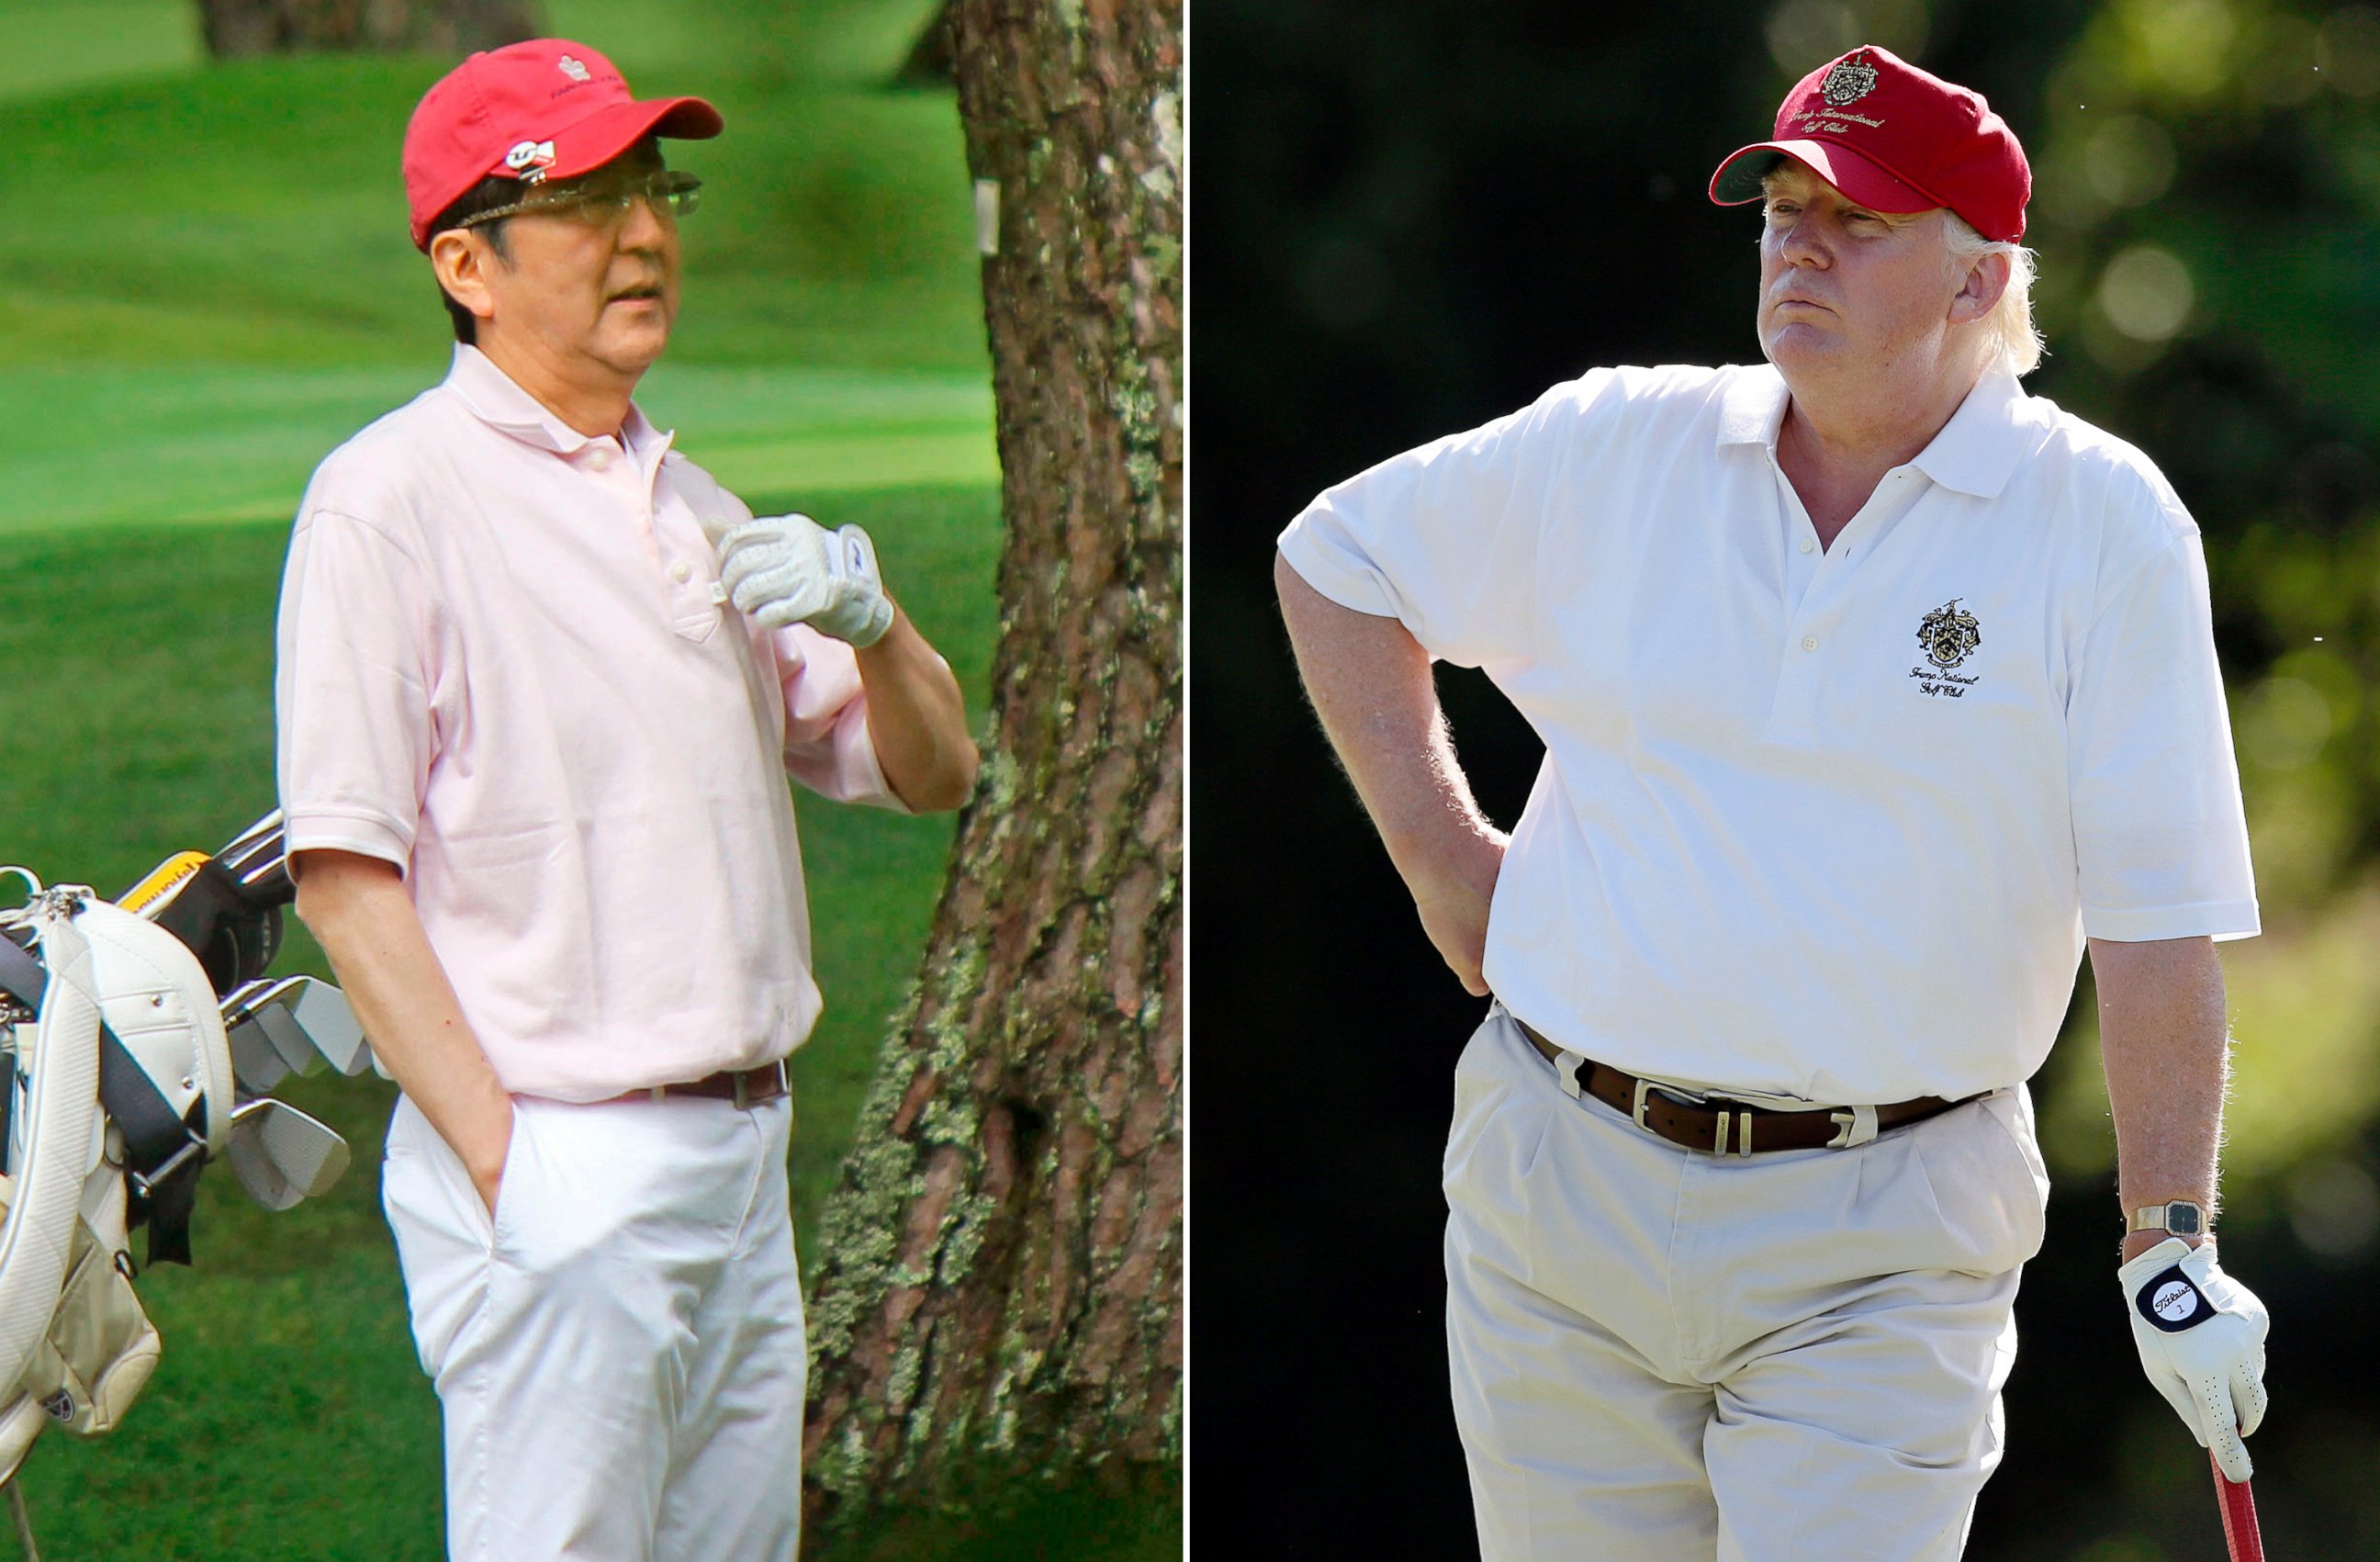 PHOTO: Donald Trump stands during a pro-am round of a golf tournament at Congressional Country Club in Bethesda, Md. on June 27, 2012, and Japanese Prime Minister Shinzo Abe playing golf in Yamanakako village, west of Tokyo, on July 23, 2016.